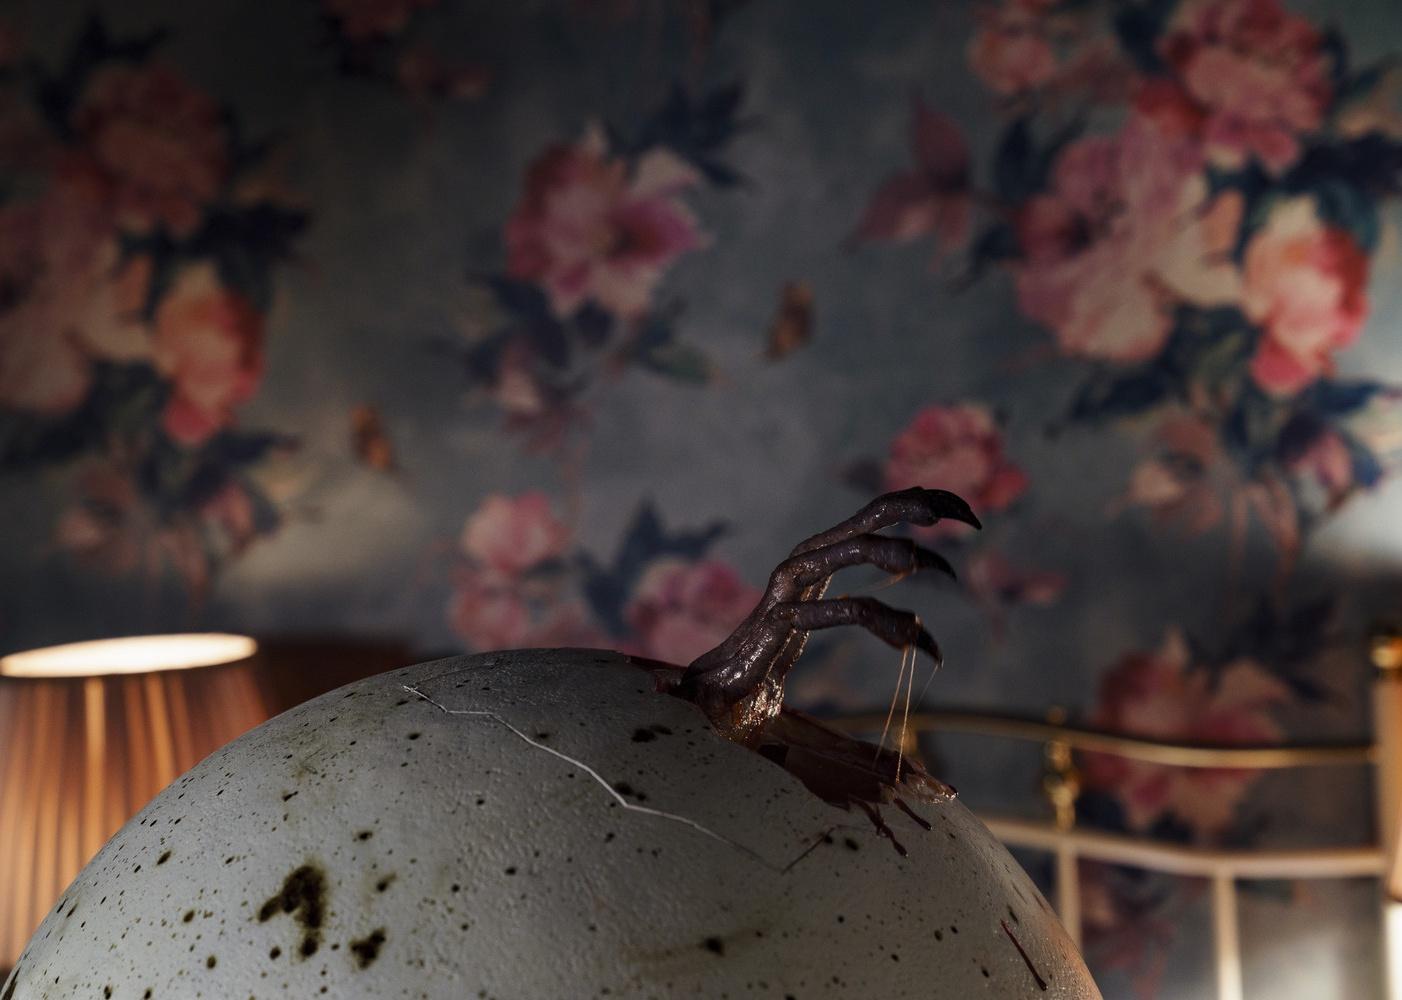 A creature hand coming out of an egg with floral wallpaper in the background